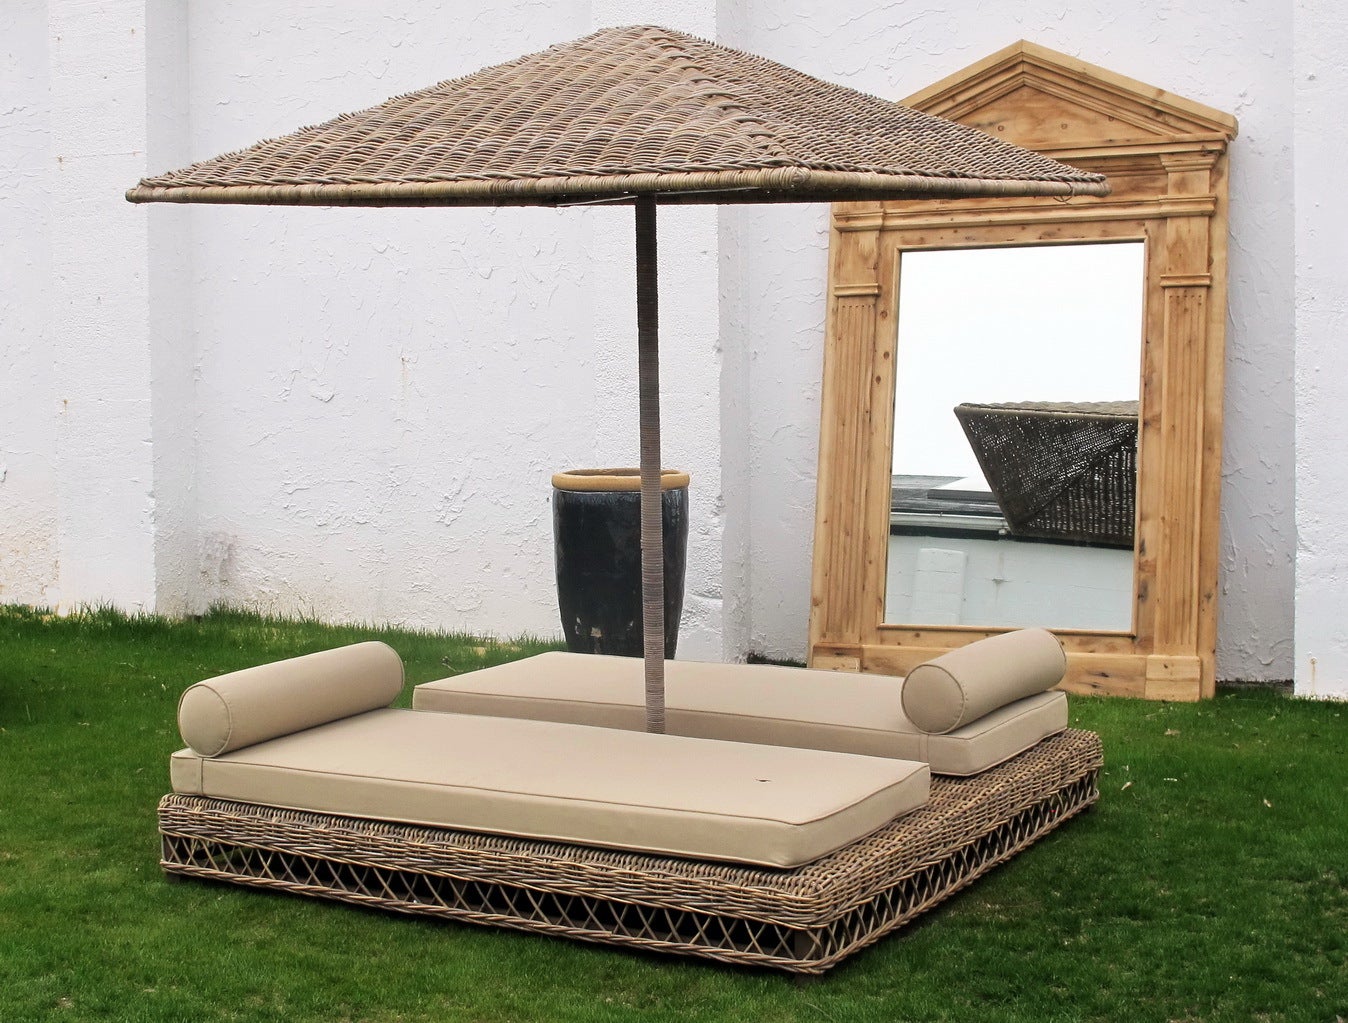 Outdoor Wicker Double lounger